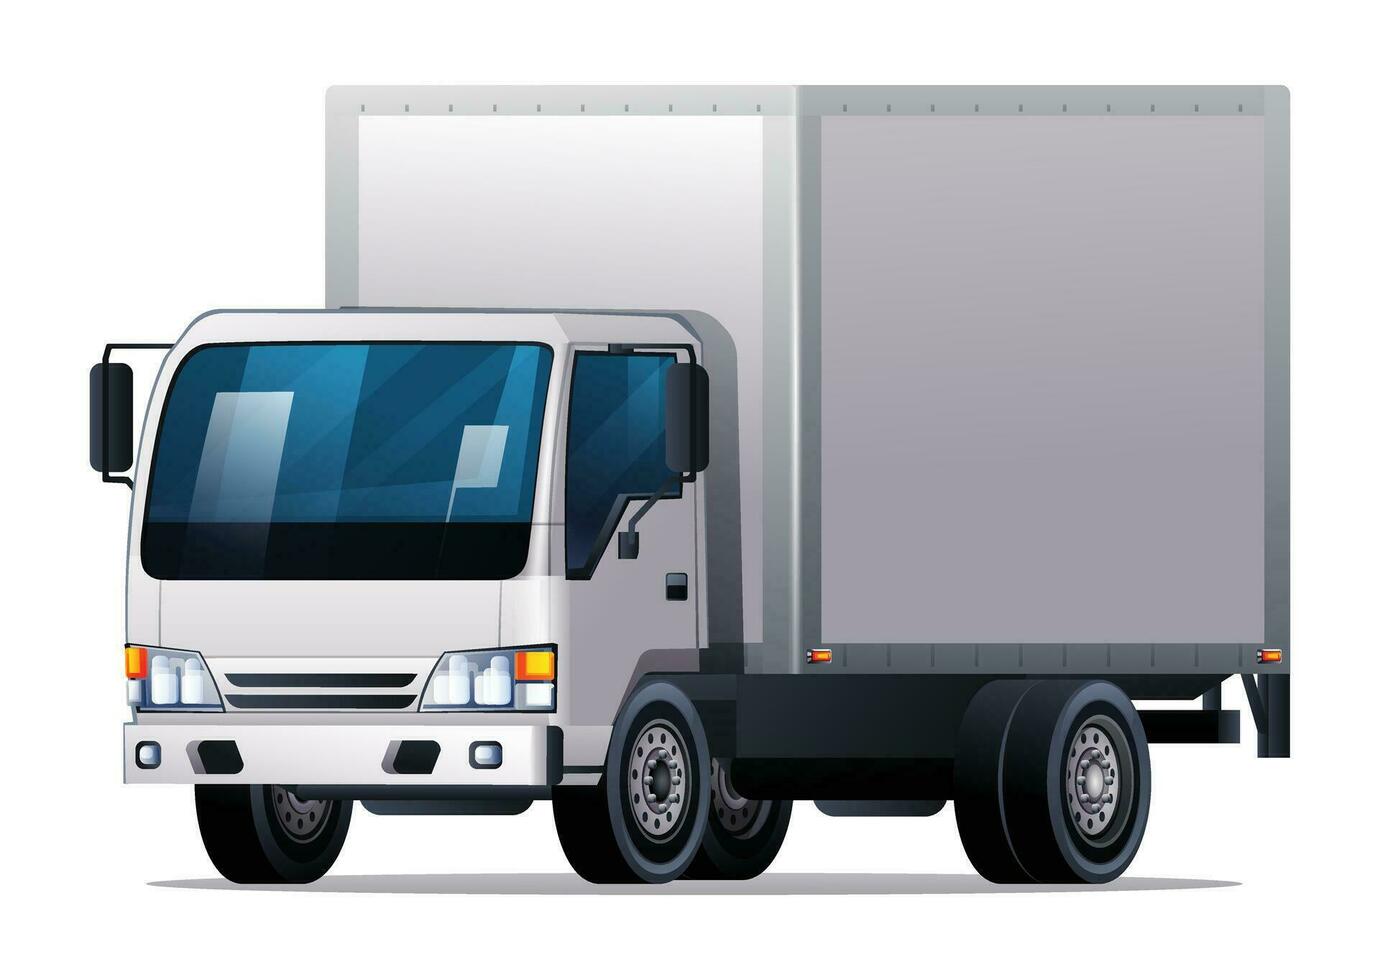 Box truck vector illustration. Cargo delivery truck isolated on white background